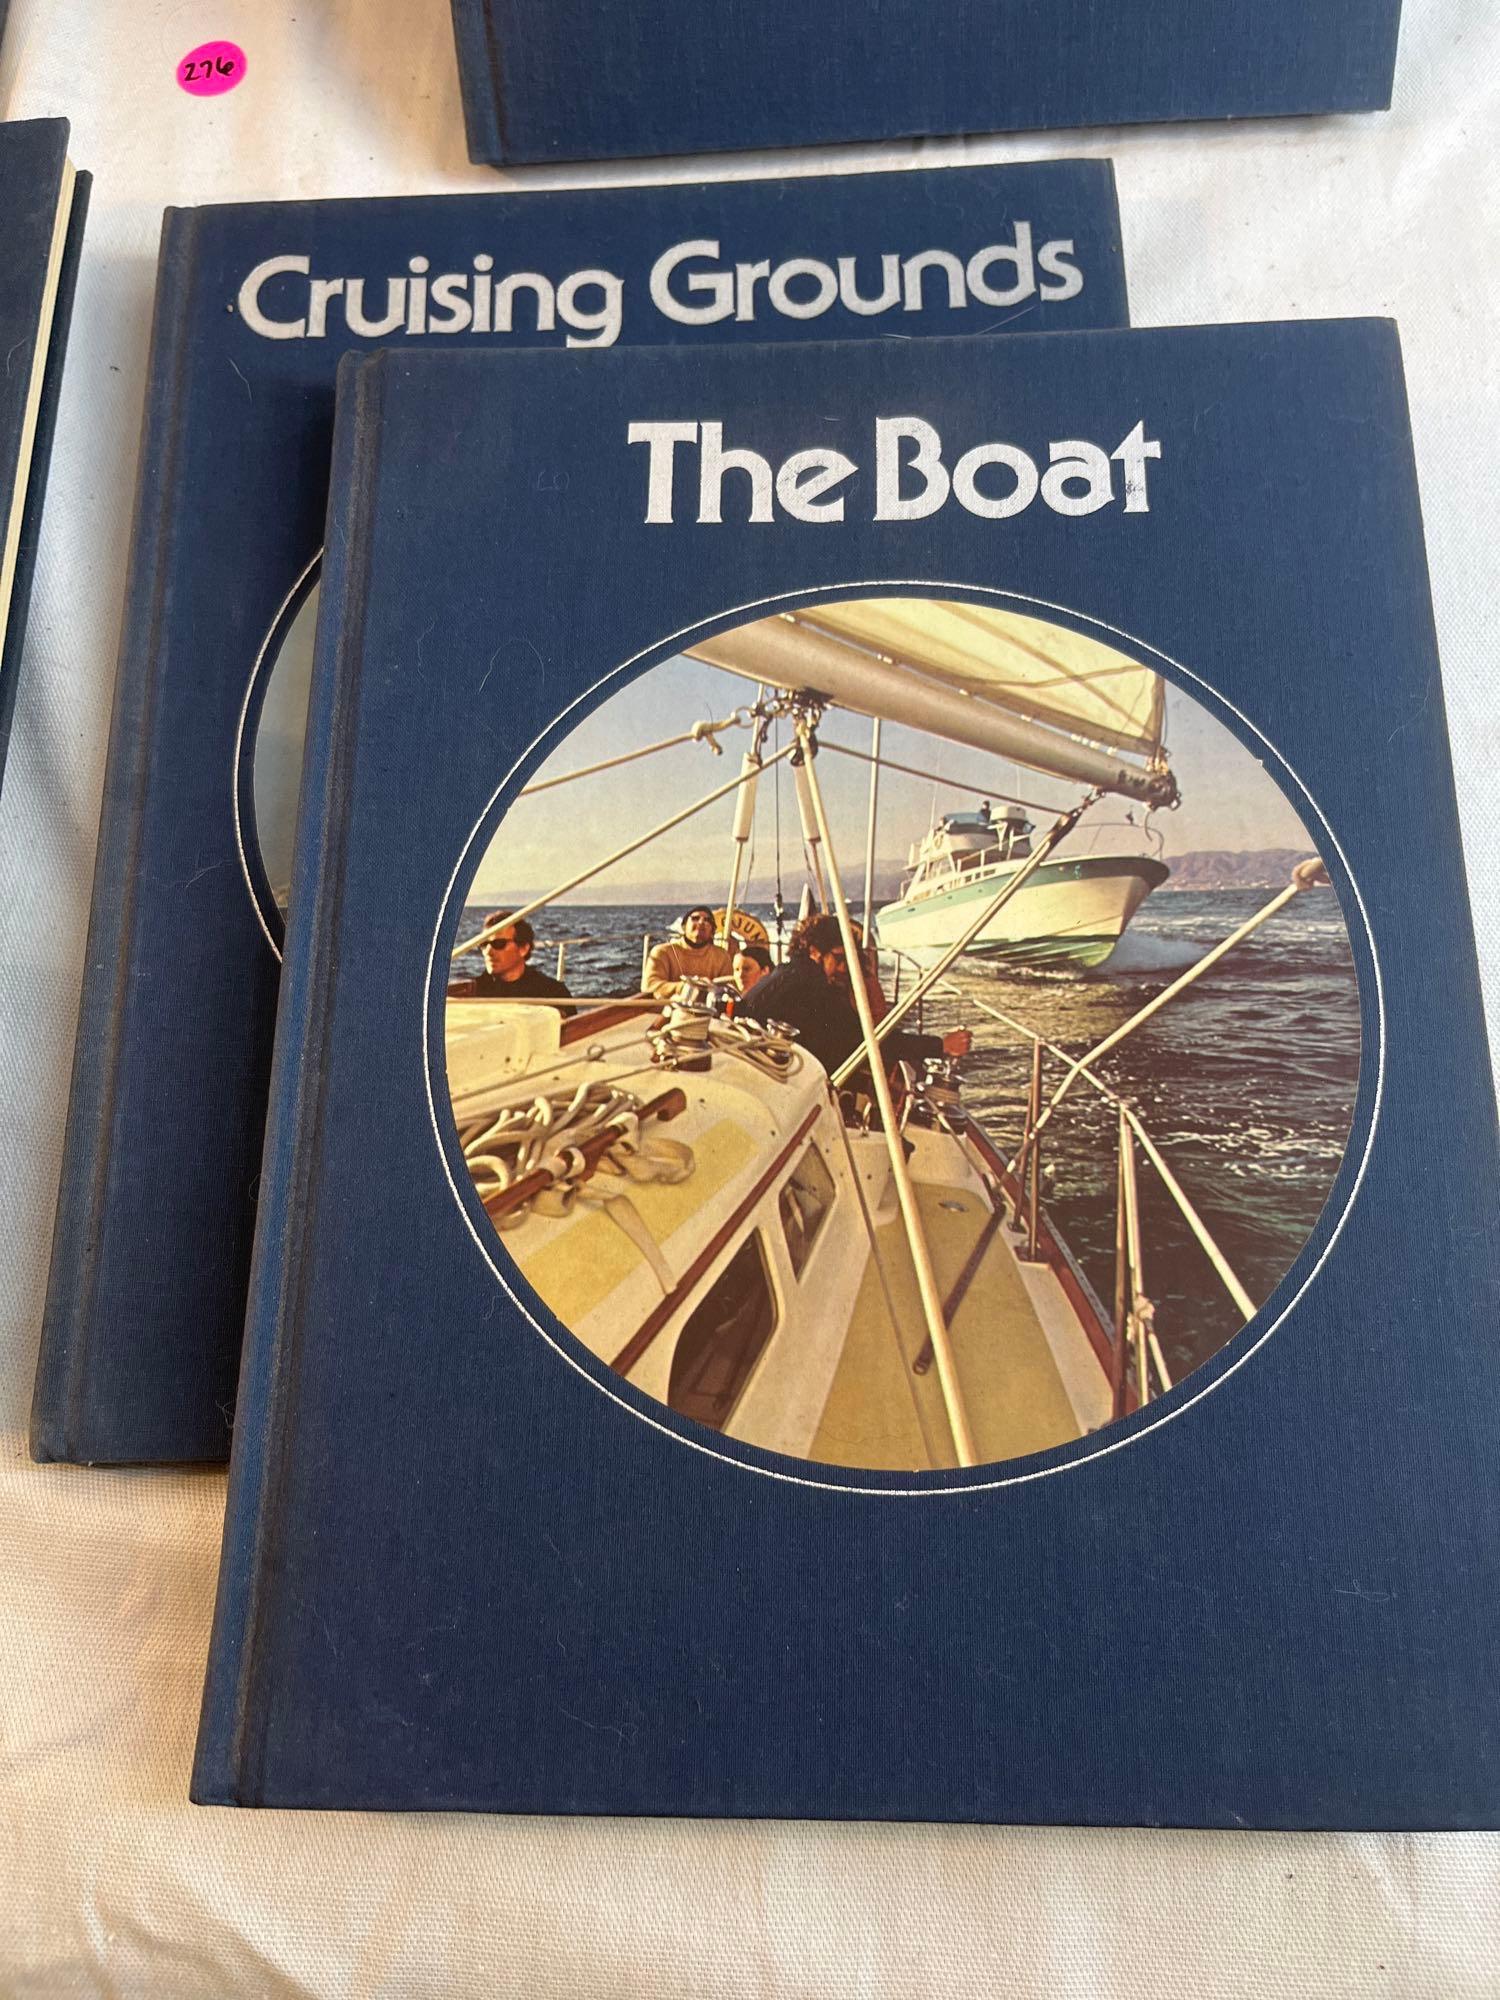 The Time-Life Library of Boating book set